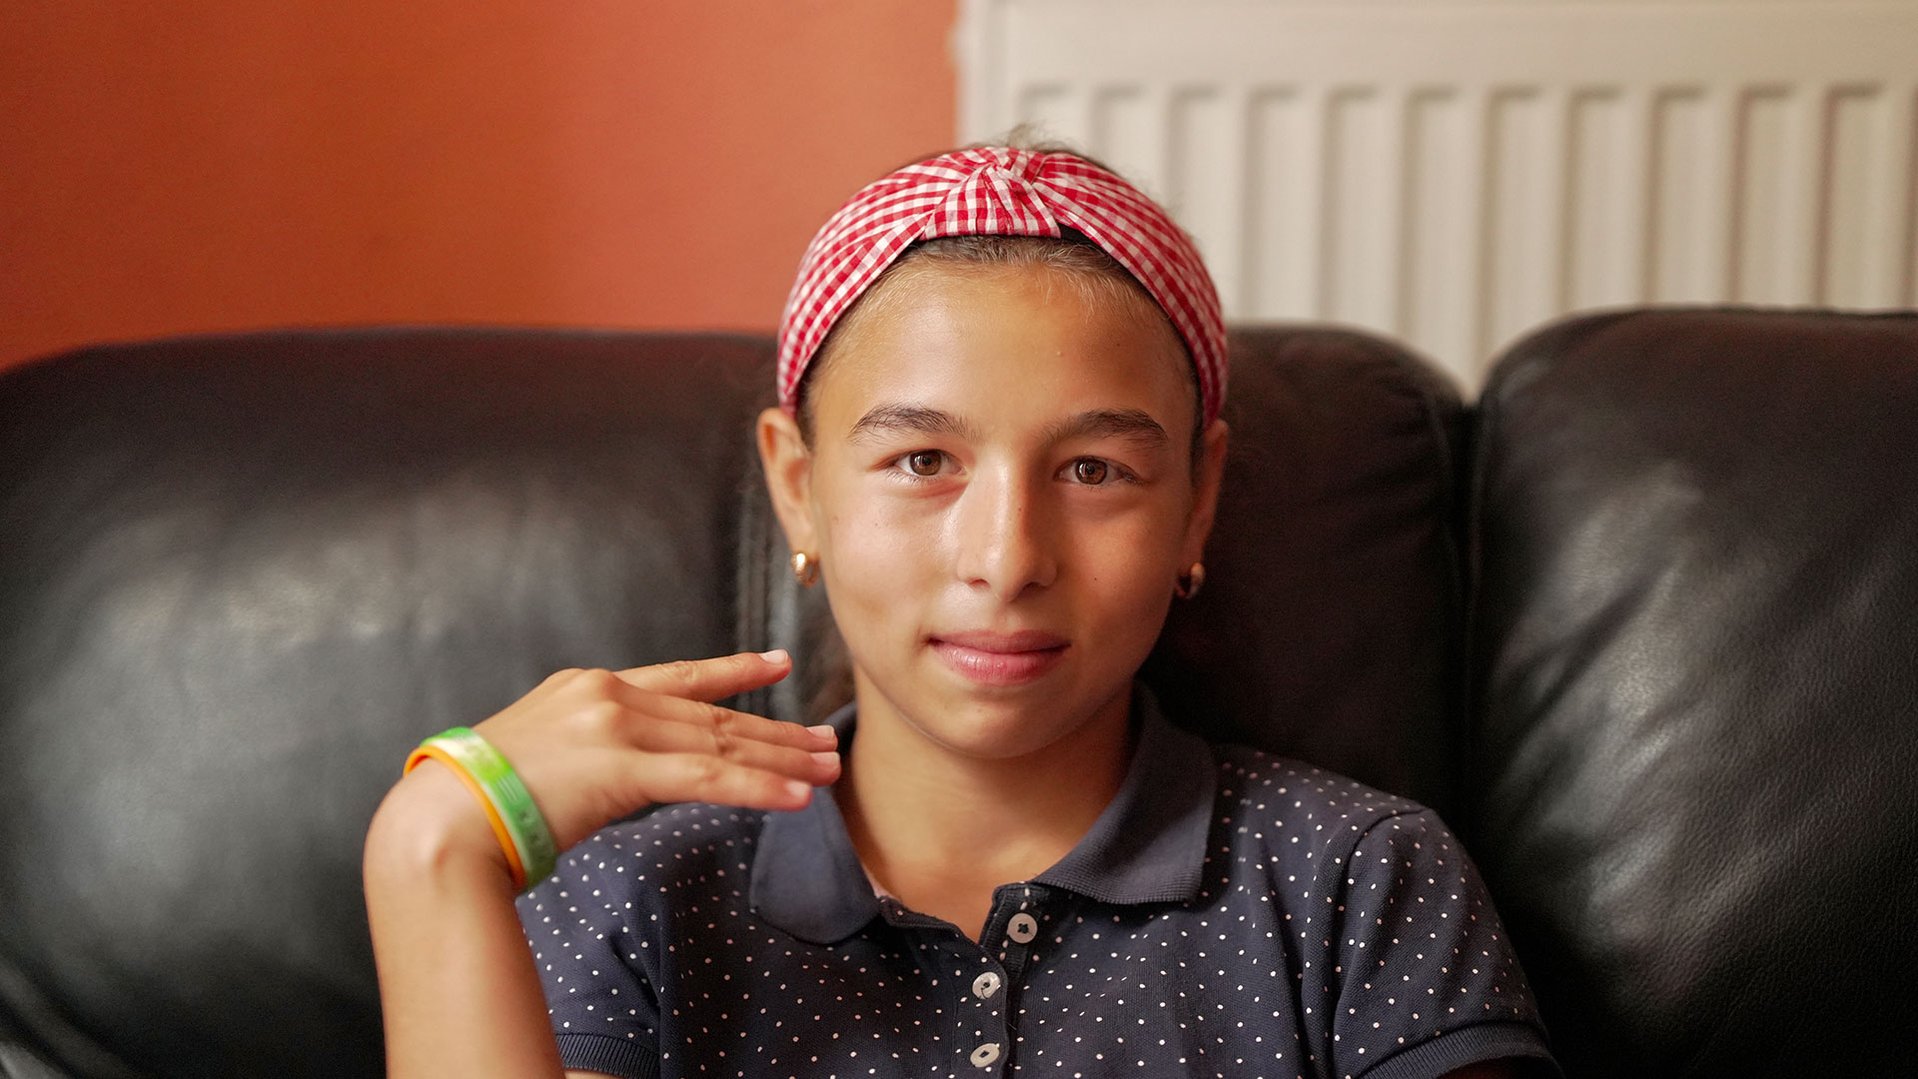 Roda fled her home town because of the Russian invasion. She's now staying at War Child's Safe Space